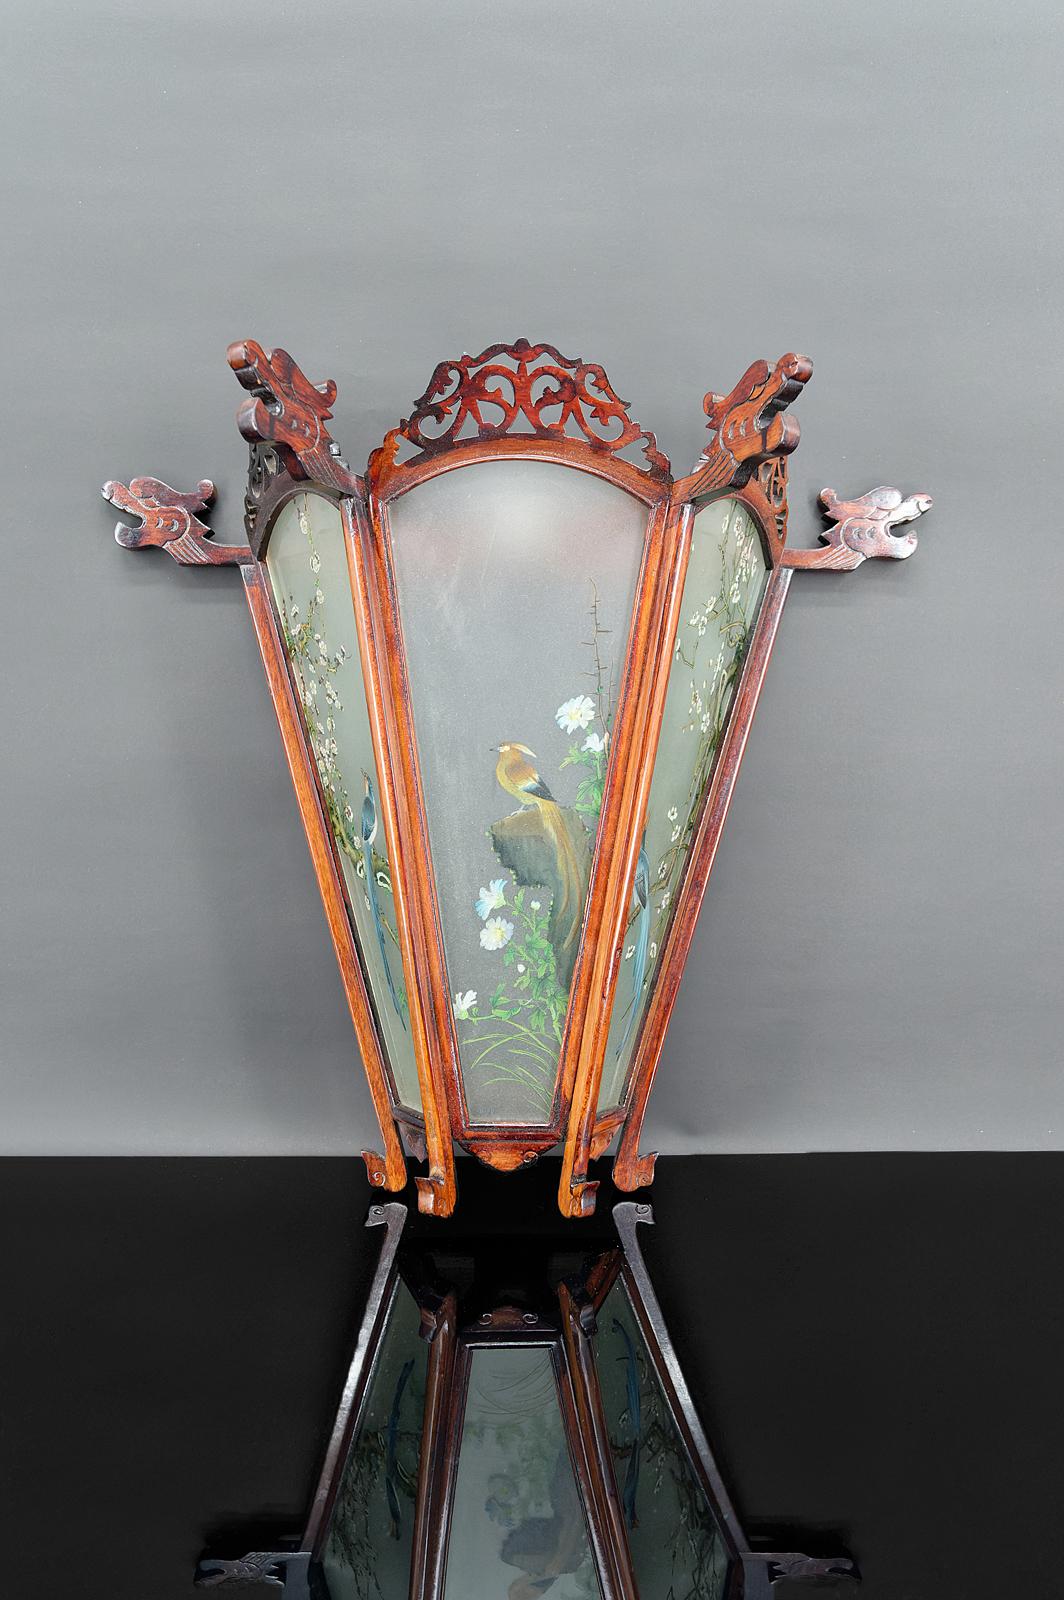 Lantern-shaped wall sconce.

Wooden structure carved with dragons.
Glasses painted with birds and floral bouquets.
China, circa 1900

In very good condition.

Dimensions:
height 43 cm
width 46 cm
depth 23 cm